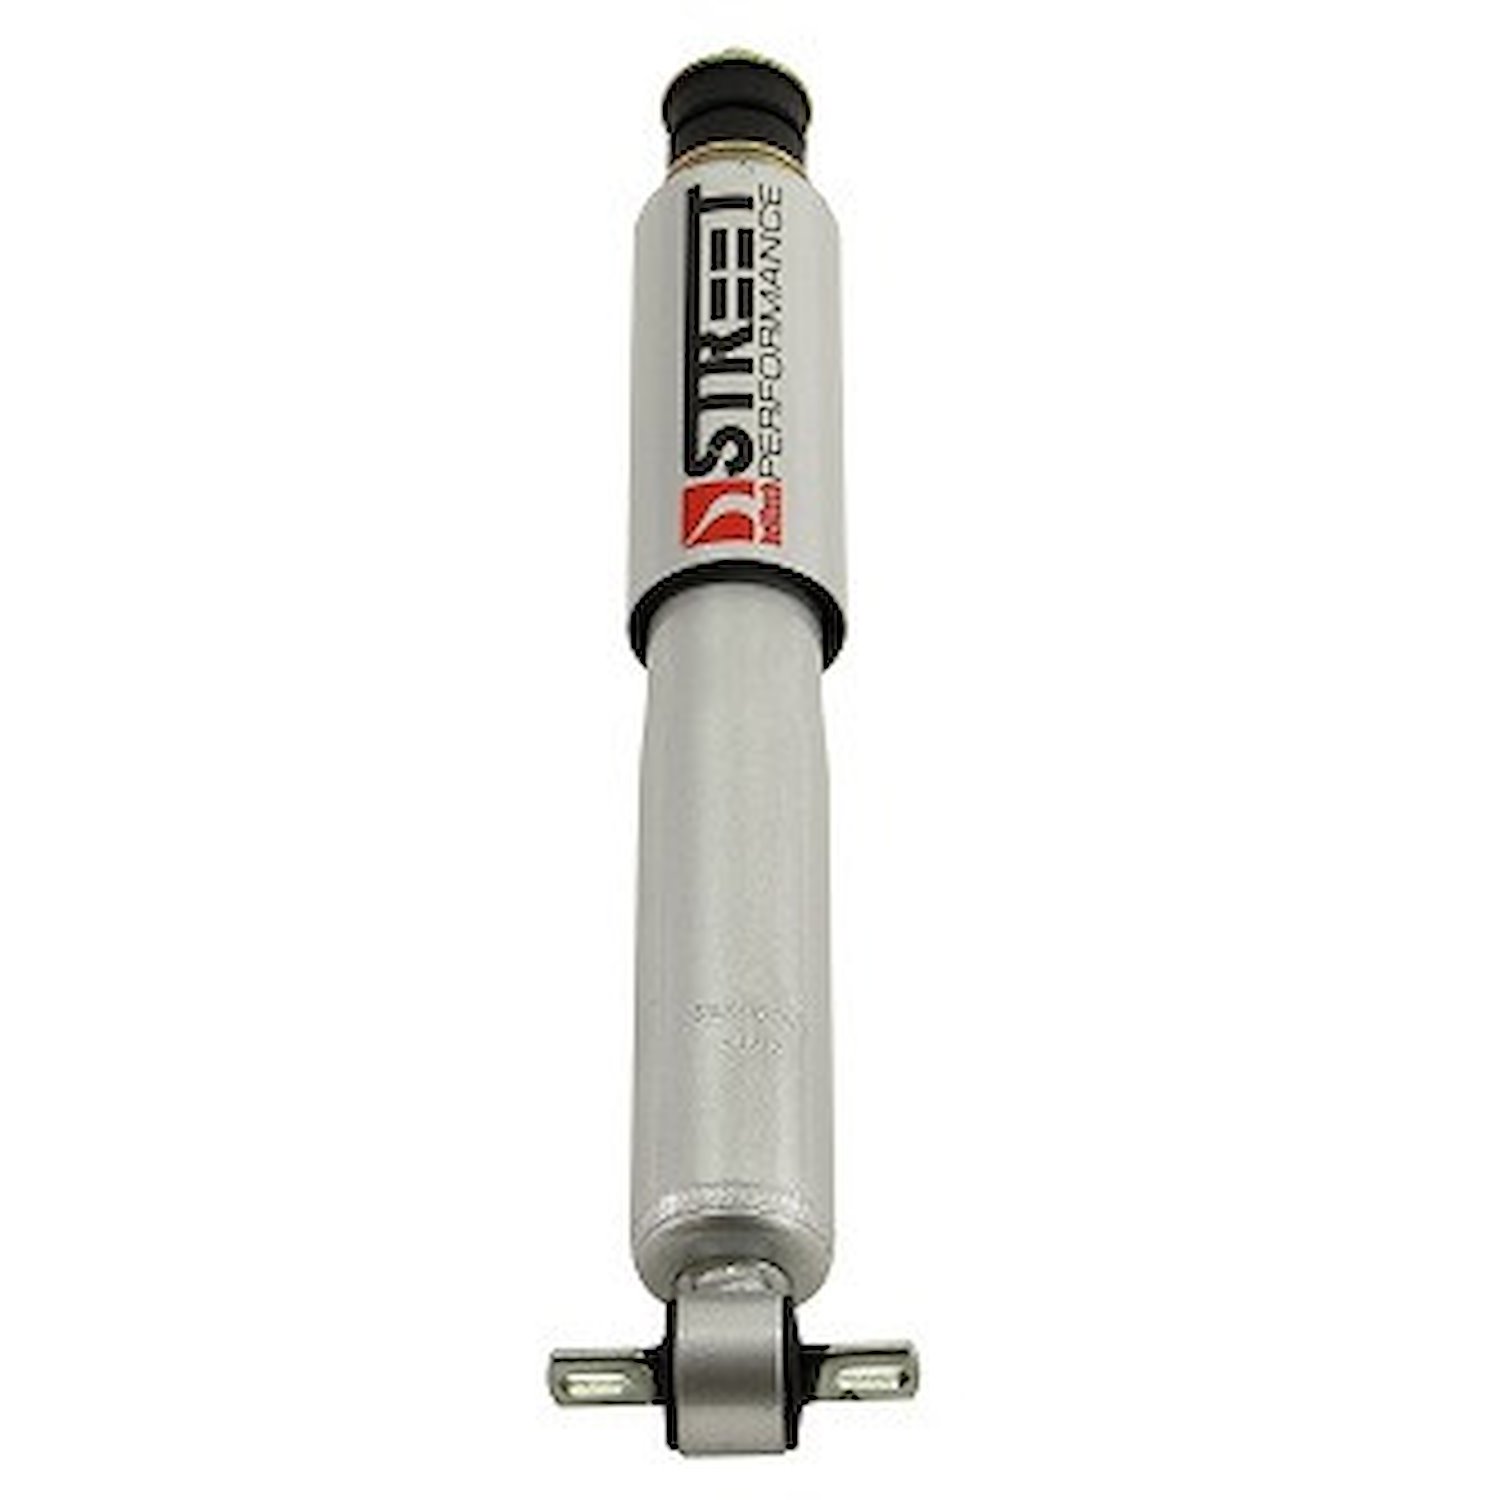 Street Performance OEM Shock for 1970-1979 Ford F-100/F-150